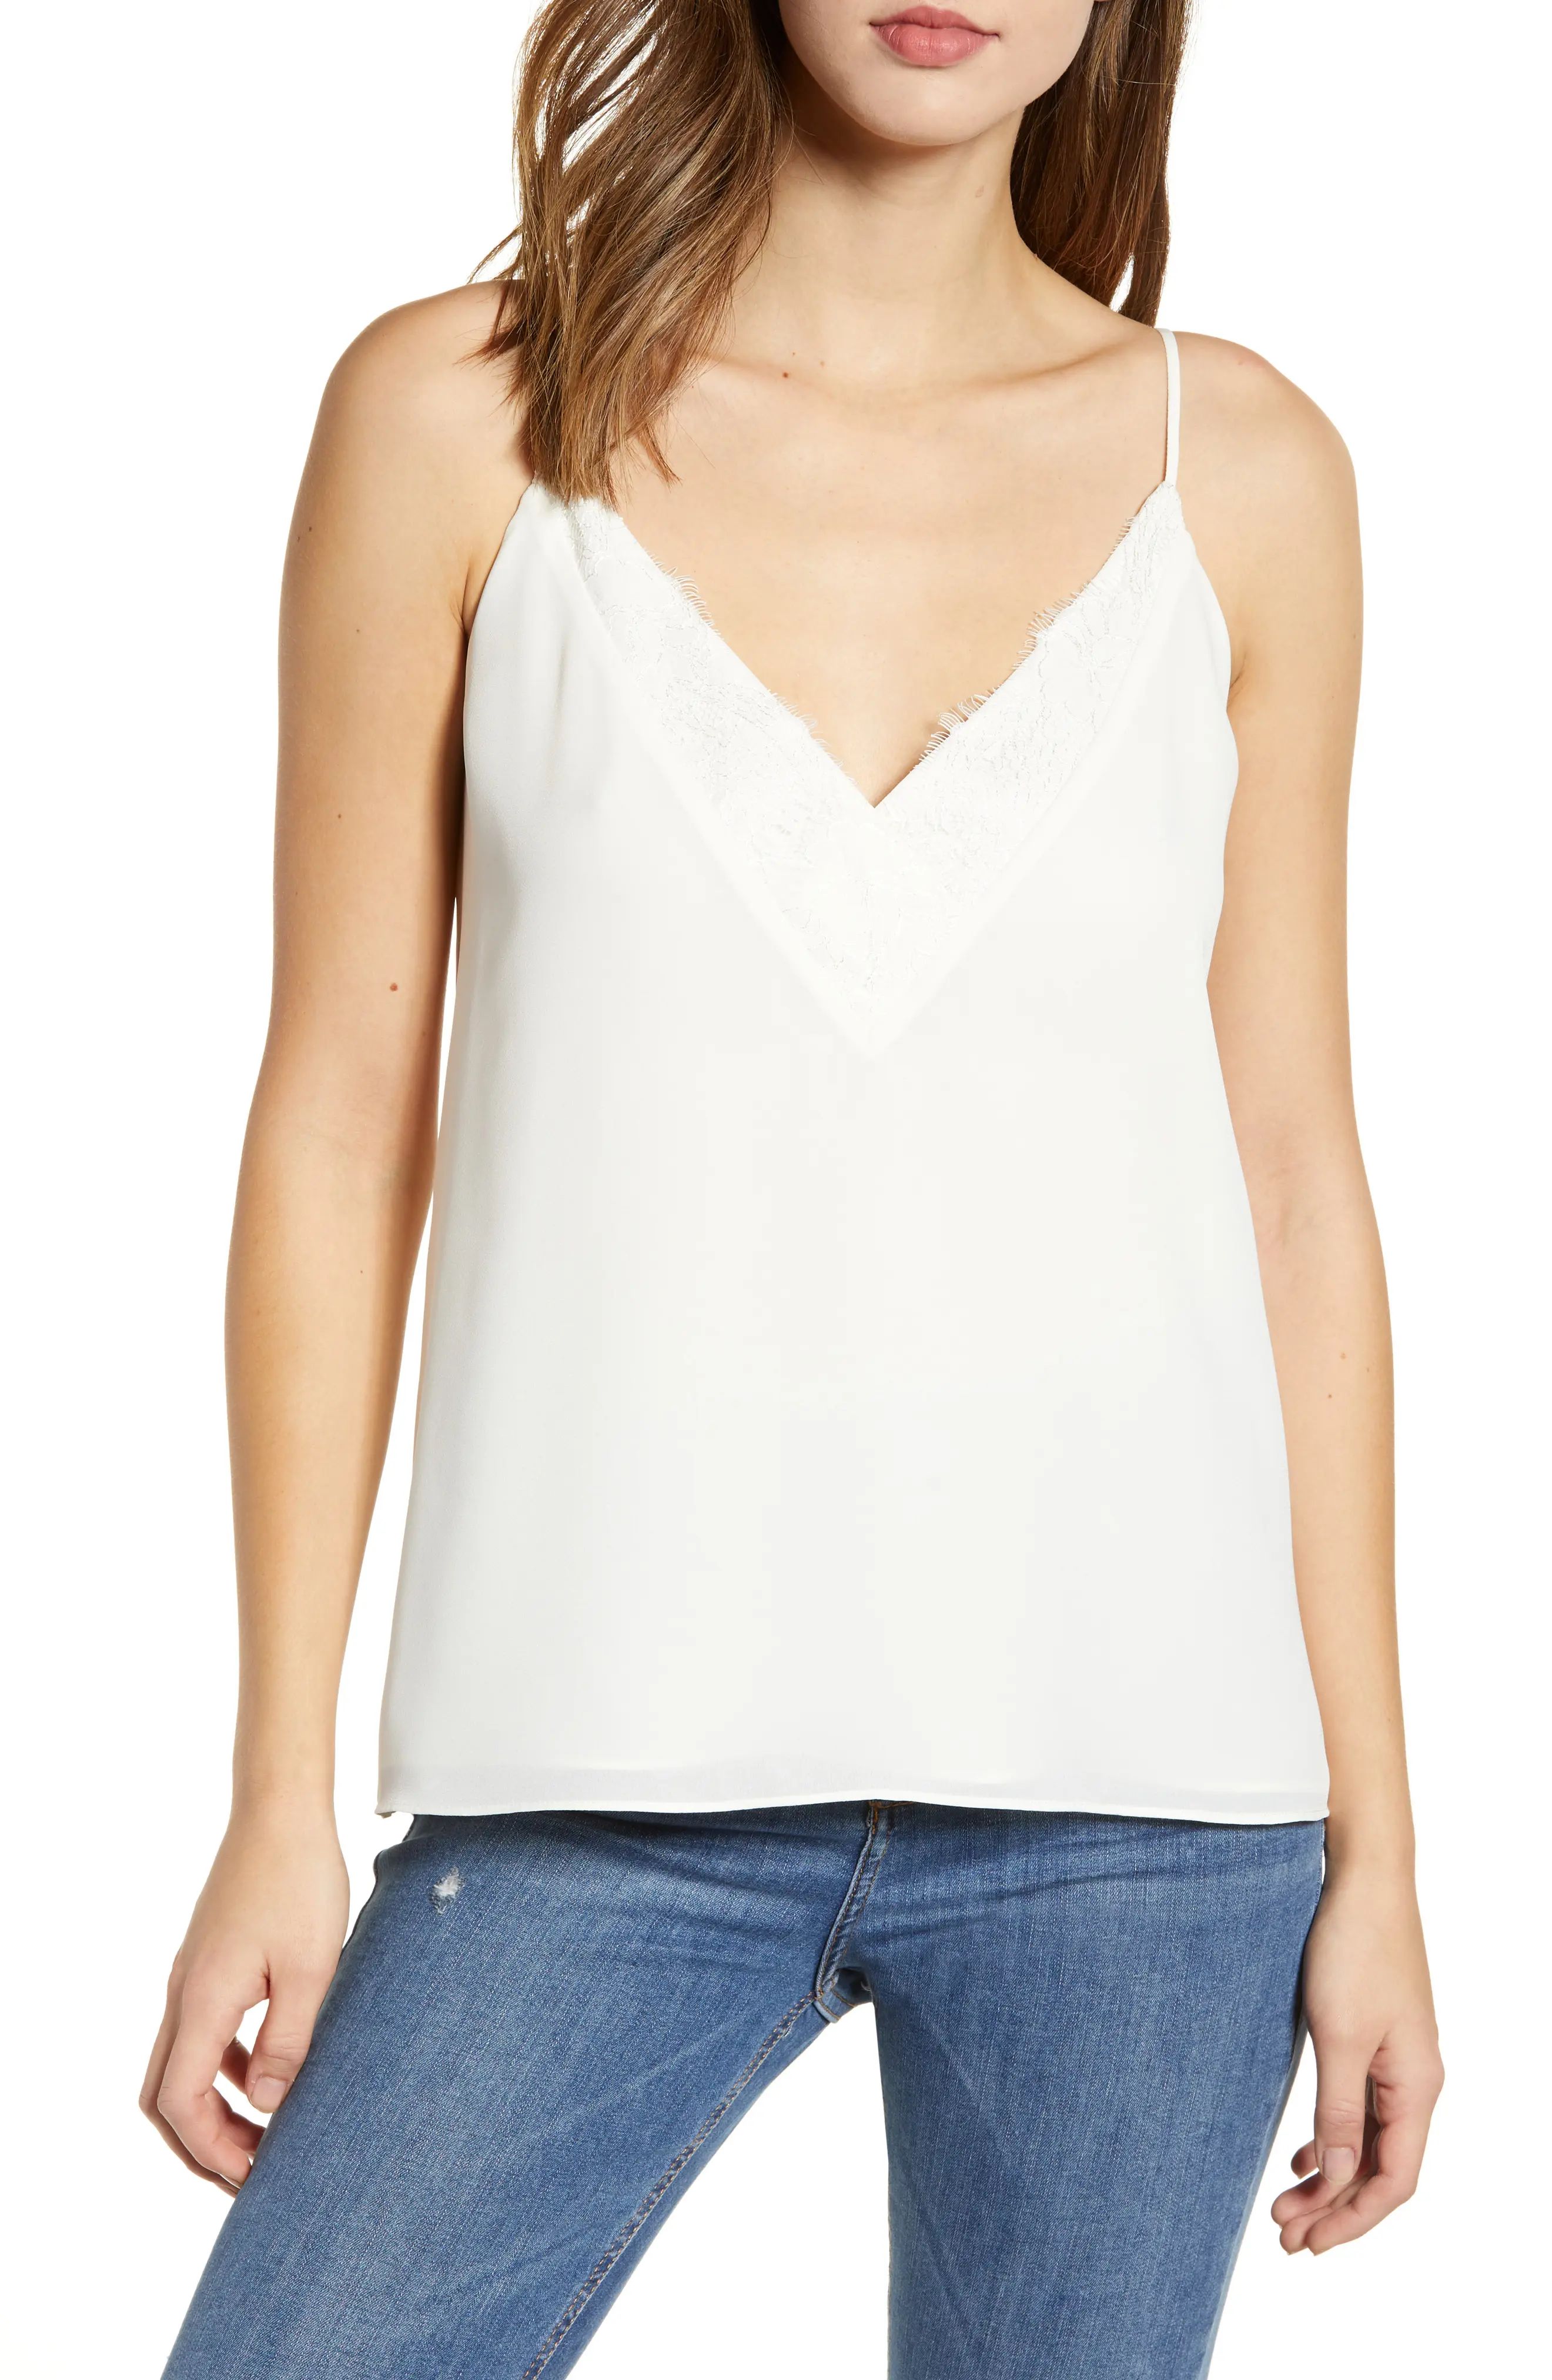 Women's Socialite Lace Trim Camisole Top, Size X-Small - Ivory | Nordstrom